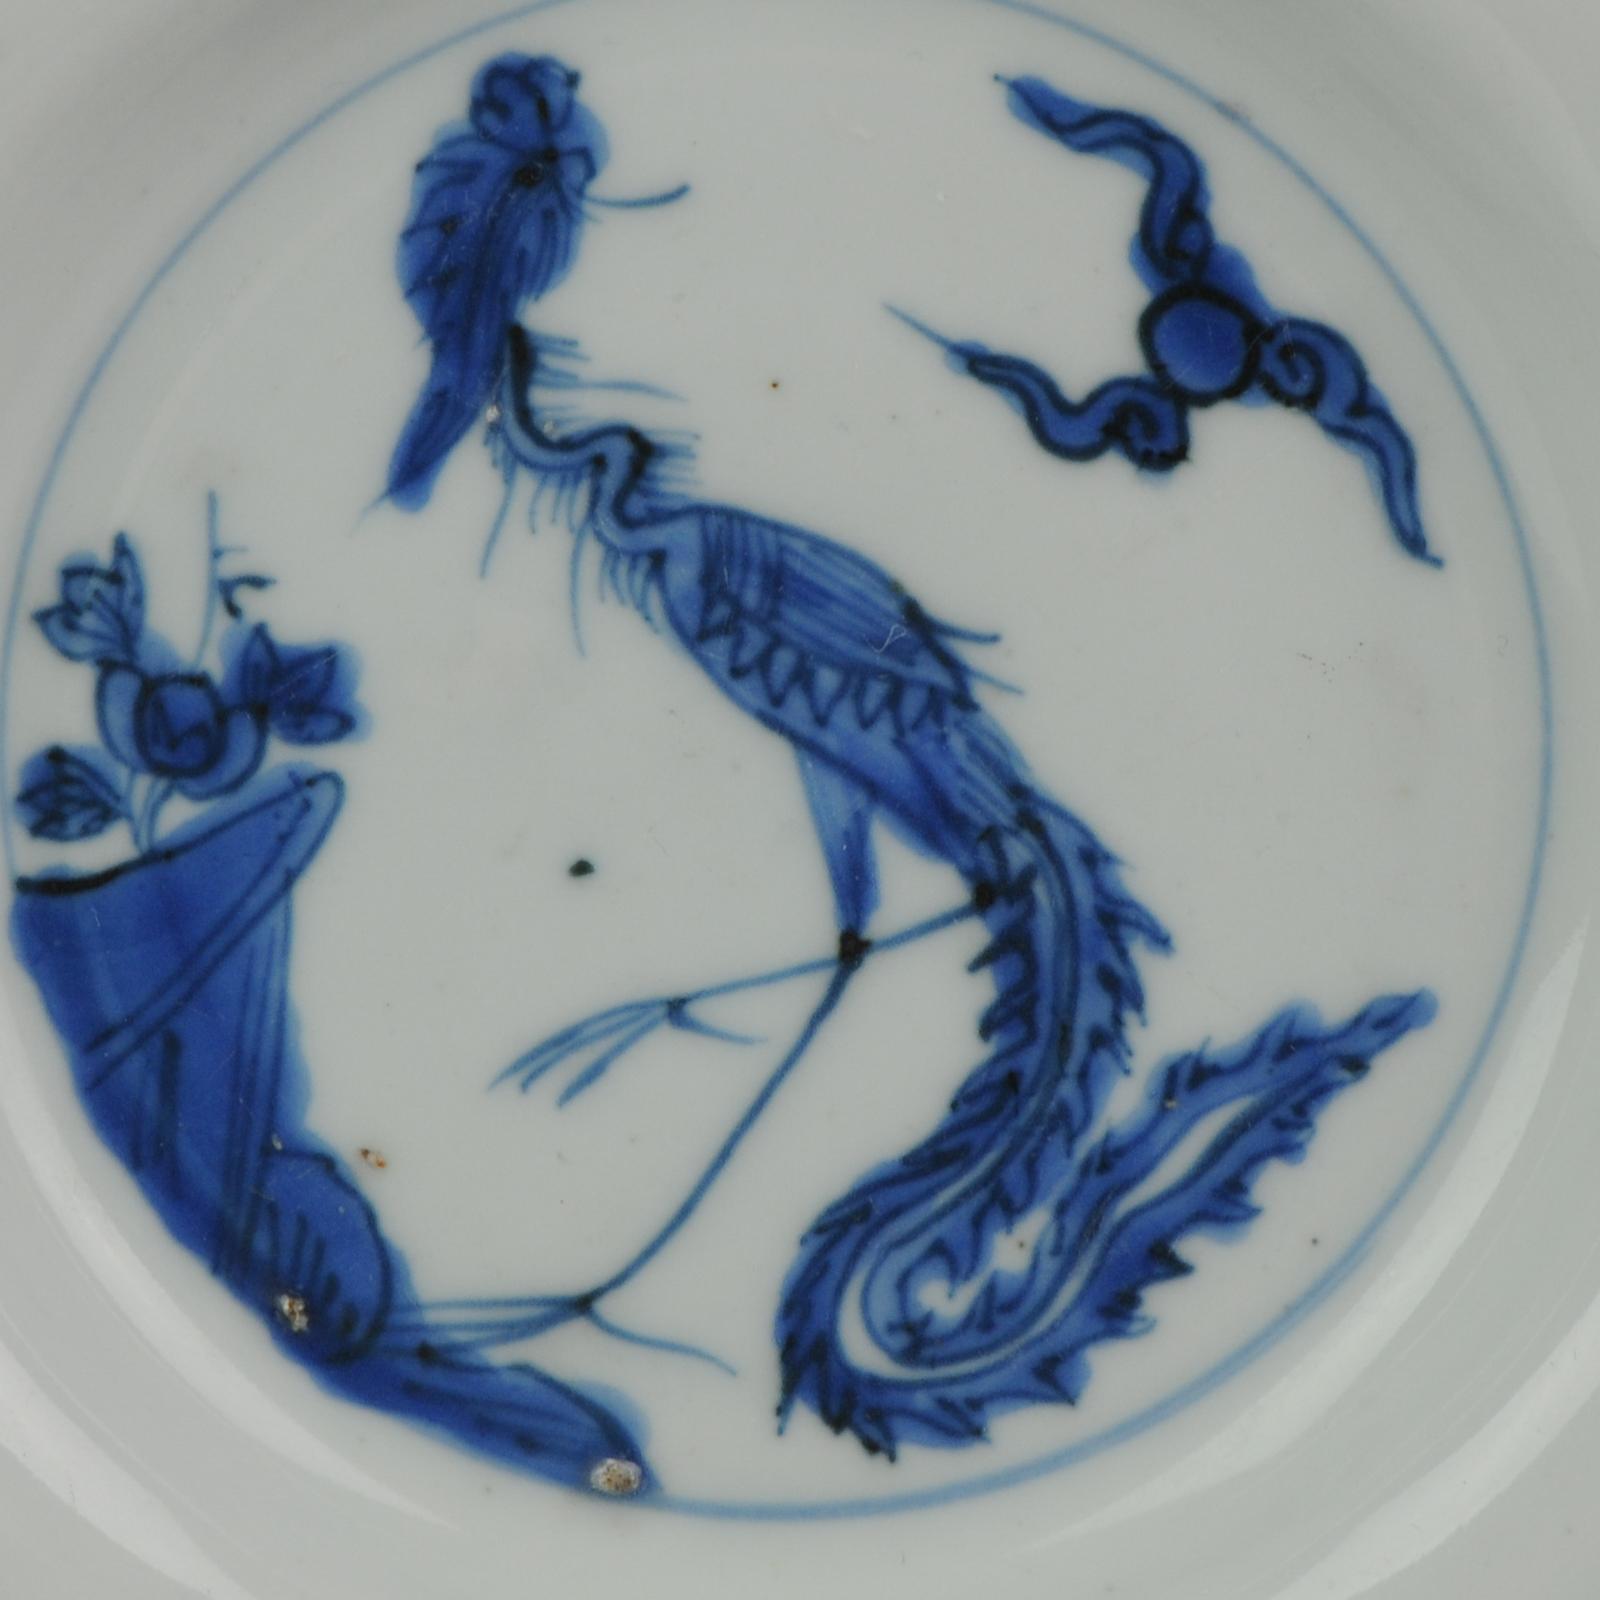 A very nicely decorated Plate, 4th quarter 16th century.

Small dish on footring, wide flat rim. Decorated in underglaze blue with a striding phoenix in schematically rendered landscape with a cloud motif. The sides and rim are undecorated. On the